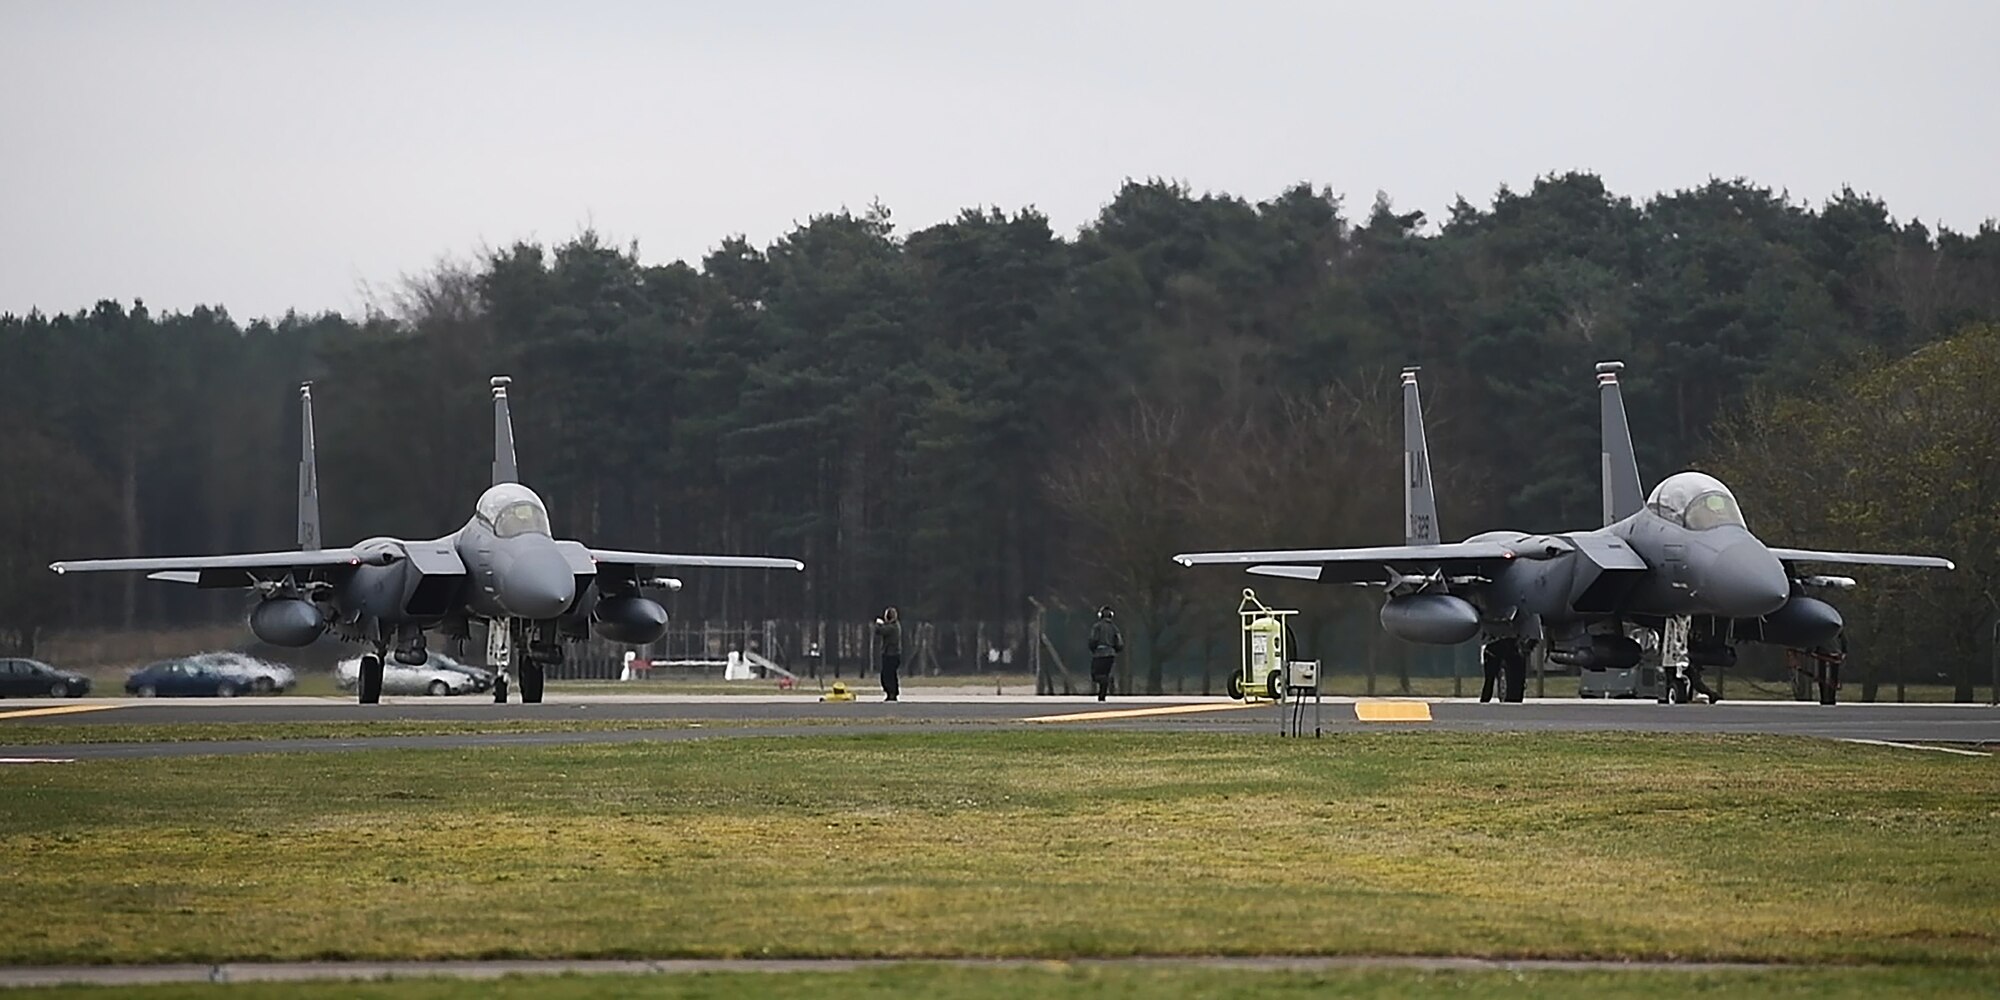 48th Fighter Wing F-15E Strike Eagles prepare to take off to participate in exercise Point Blank at Royal Air Force Lakenheath, England, March 22, 2019. Alongside F-15E Strike Eagles assigned to the 492nd and 494th Fighter Squadrons, RAF Typhoon, Hawk and F-35B Lightning jets also participated. (U.S. Air Force photo by Airman 1st Class Shanice Williams-Jones)